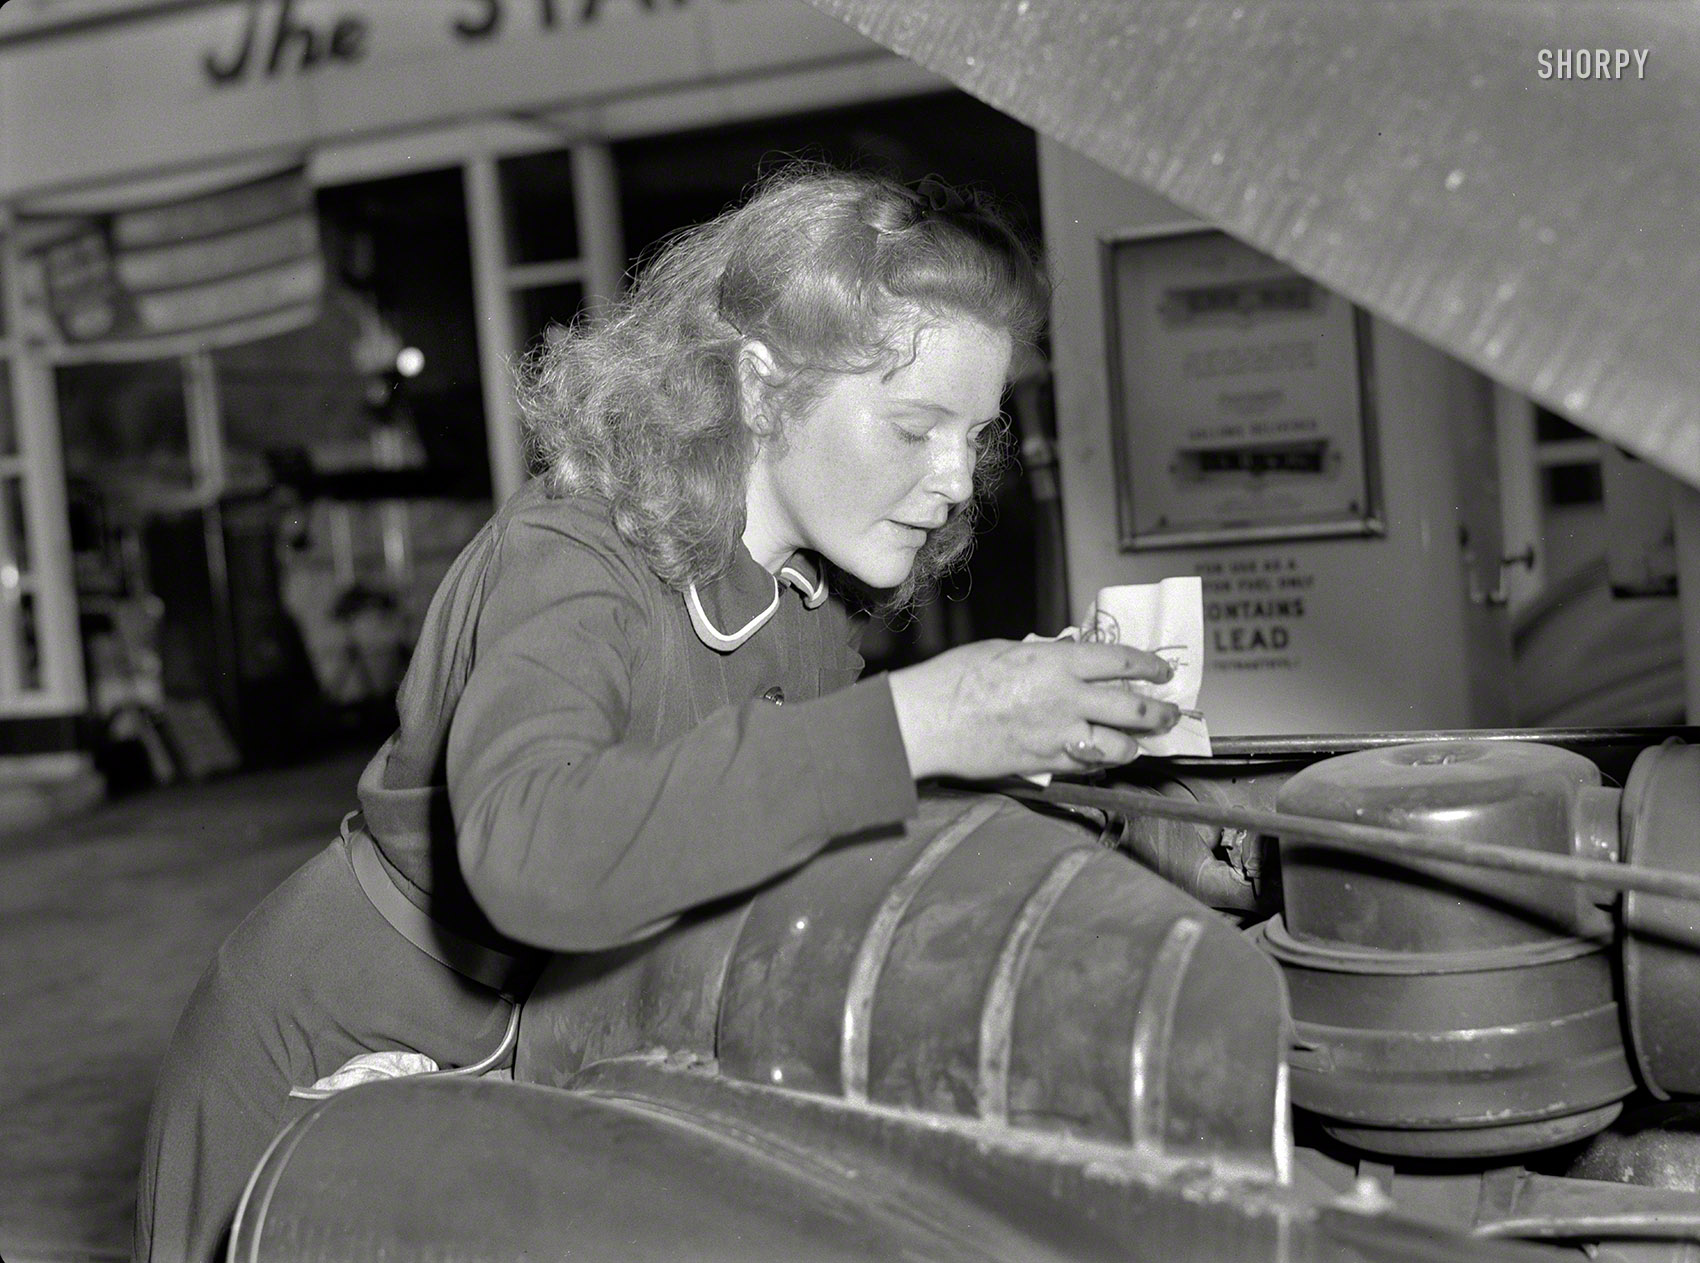 September 1942. "Tires need checking too? Shifting trends of employment in wartime America have opened up new jobs for women such as this young East Liverpool, Ohio, girl who has pioneered in two new fields since graduation from high school. She learned butchering first, and built up quite a reputation as a purveyor of choice cuts. Now she's one of the most efficient service station attendants in the neighborhood. Her name? Virginia Excell." Photo by Ann Rosener for the Office of War Information. View full size.